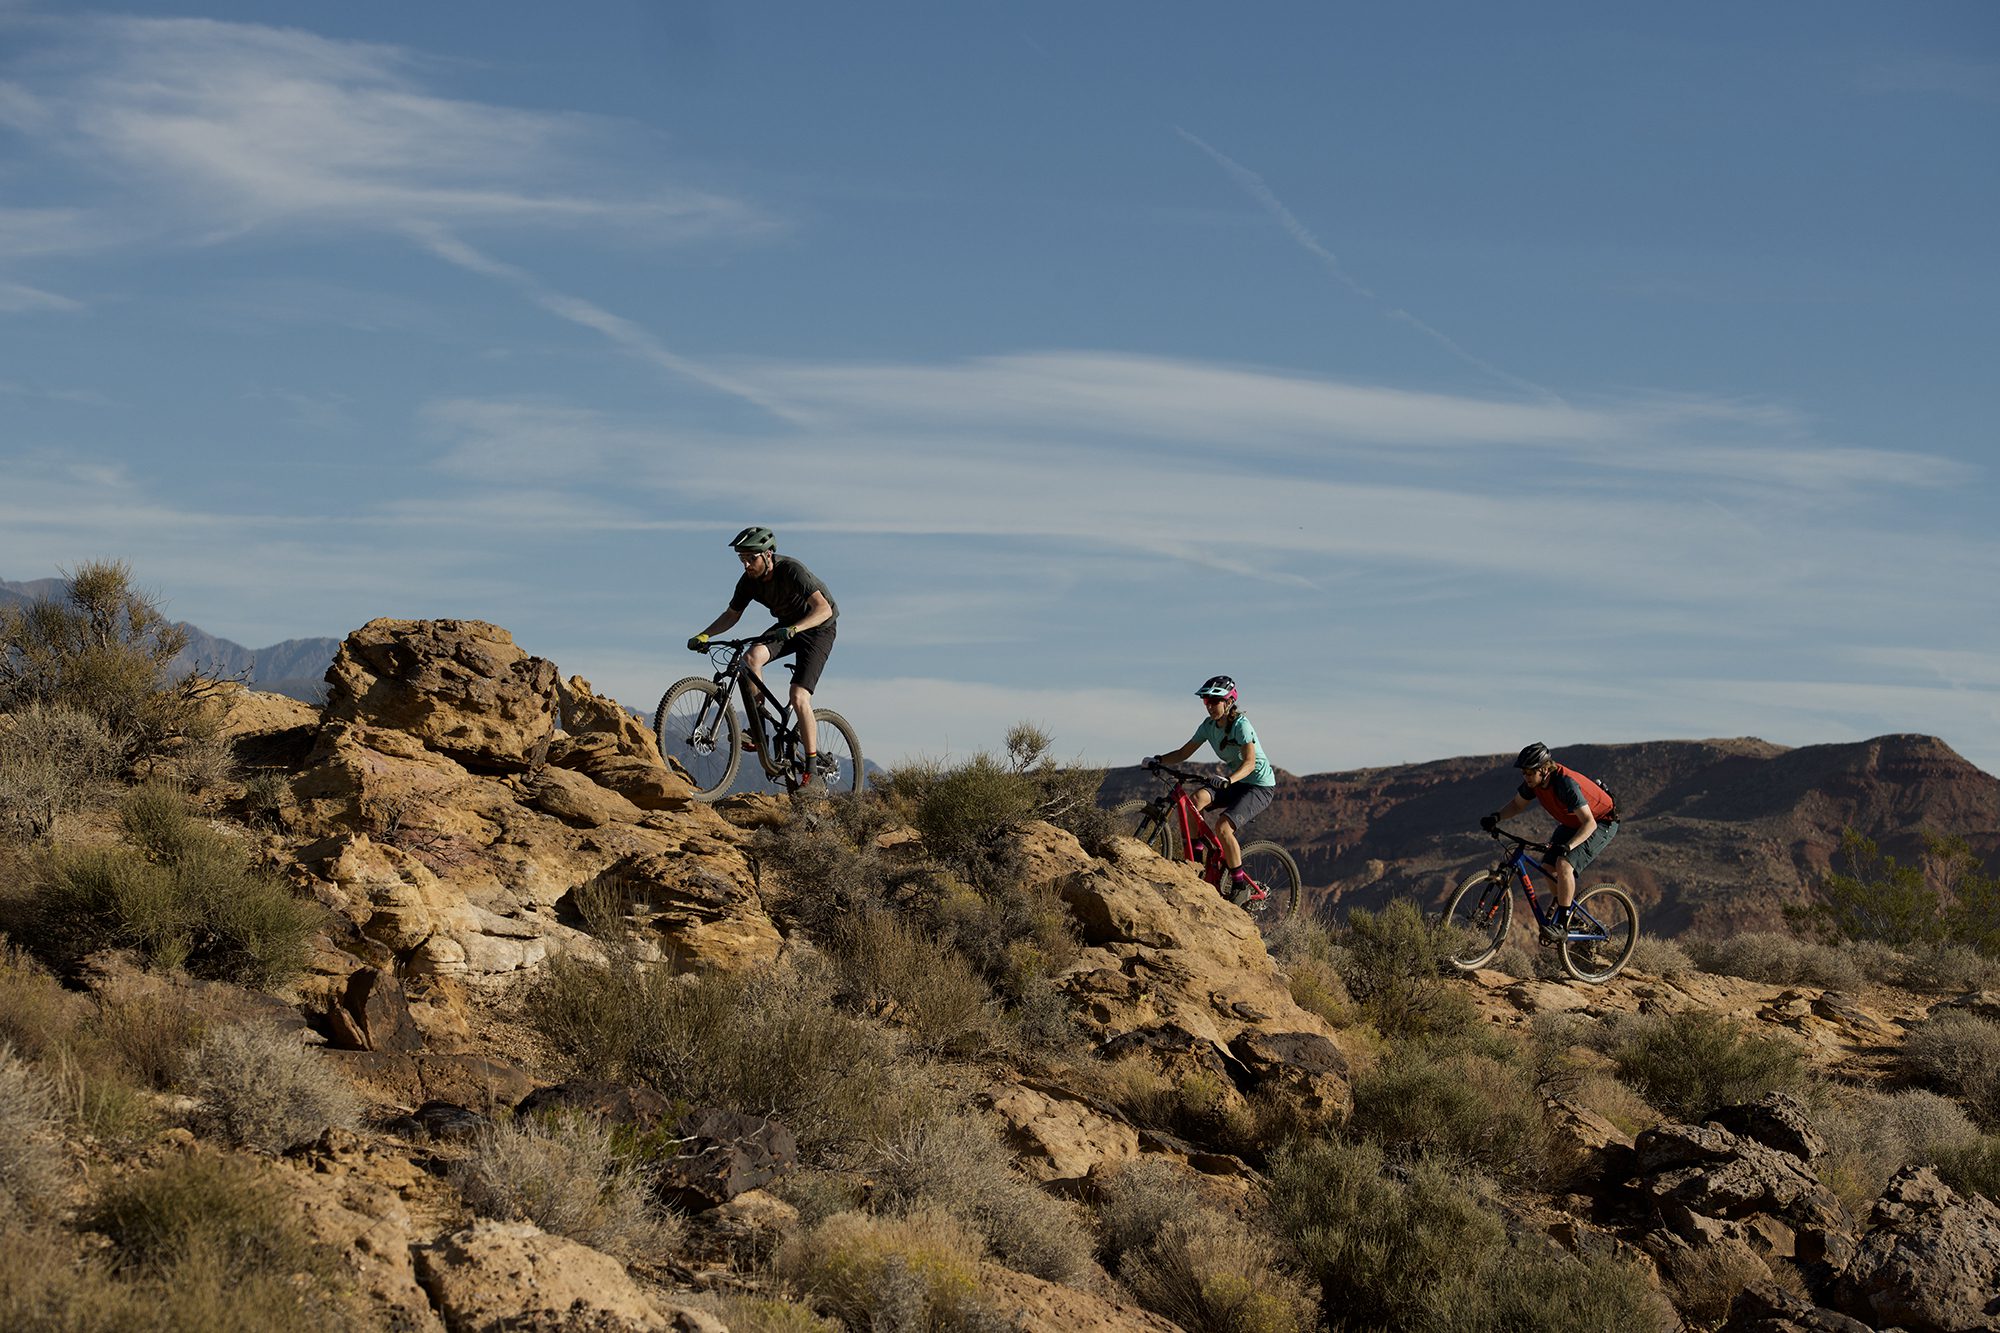 Three people riding mountain bikes over rocky desert terrain in Nevada, with bright blue sky overhead.